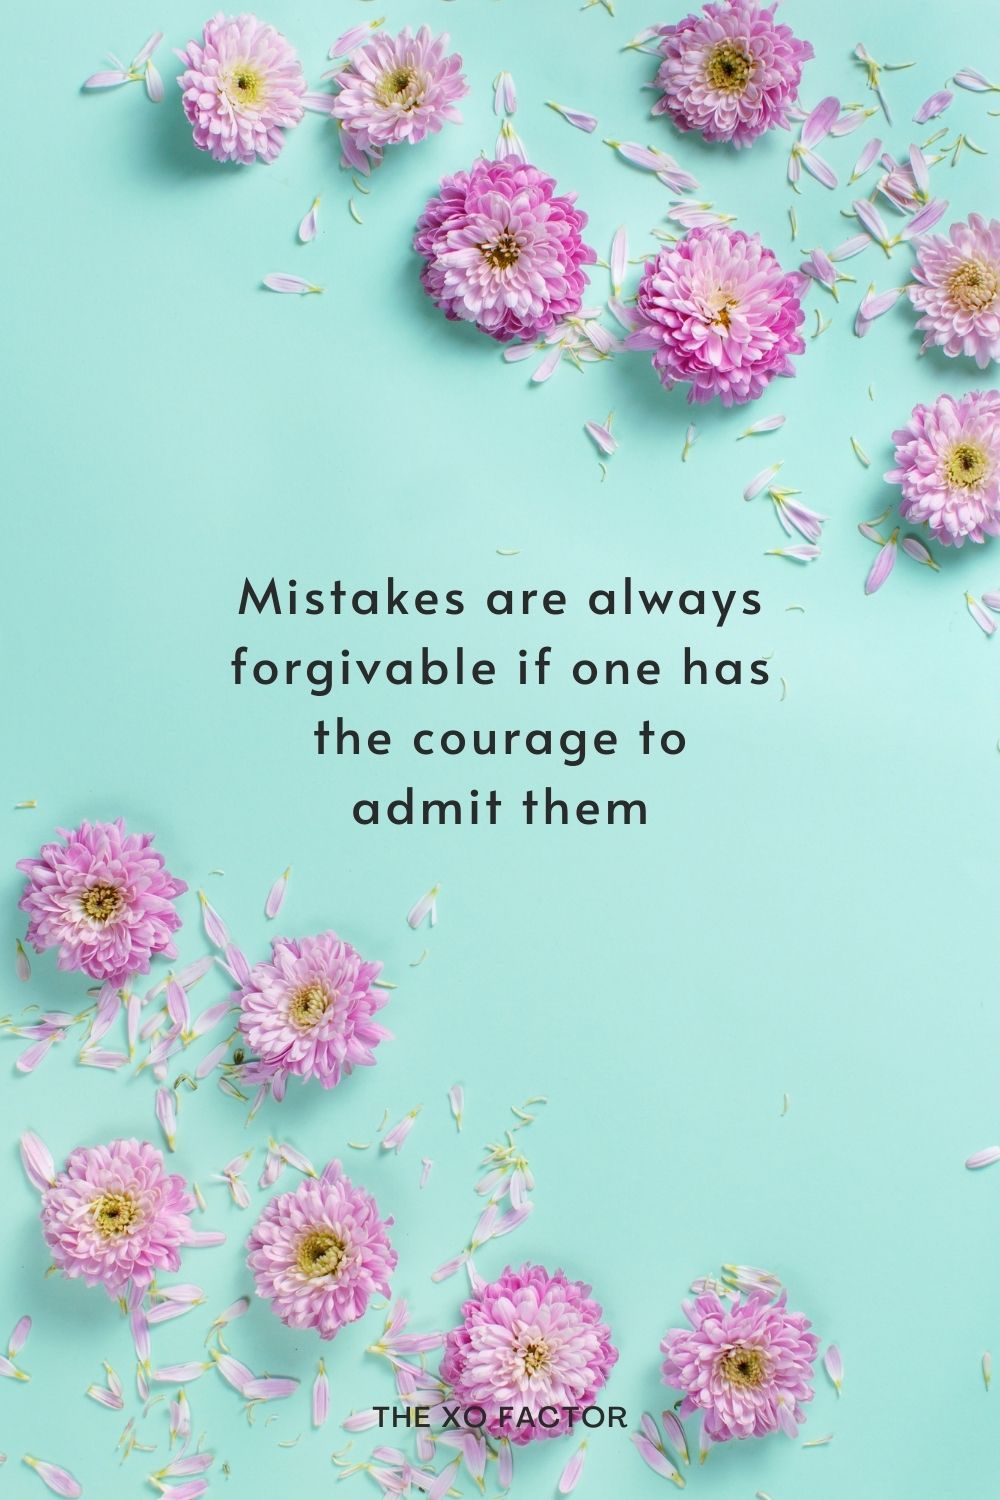 Mistakes are always forgivable if one has the courage to admit them